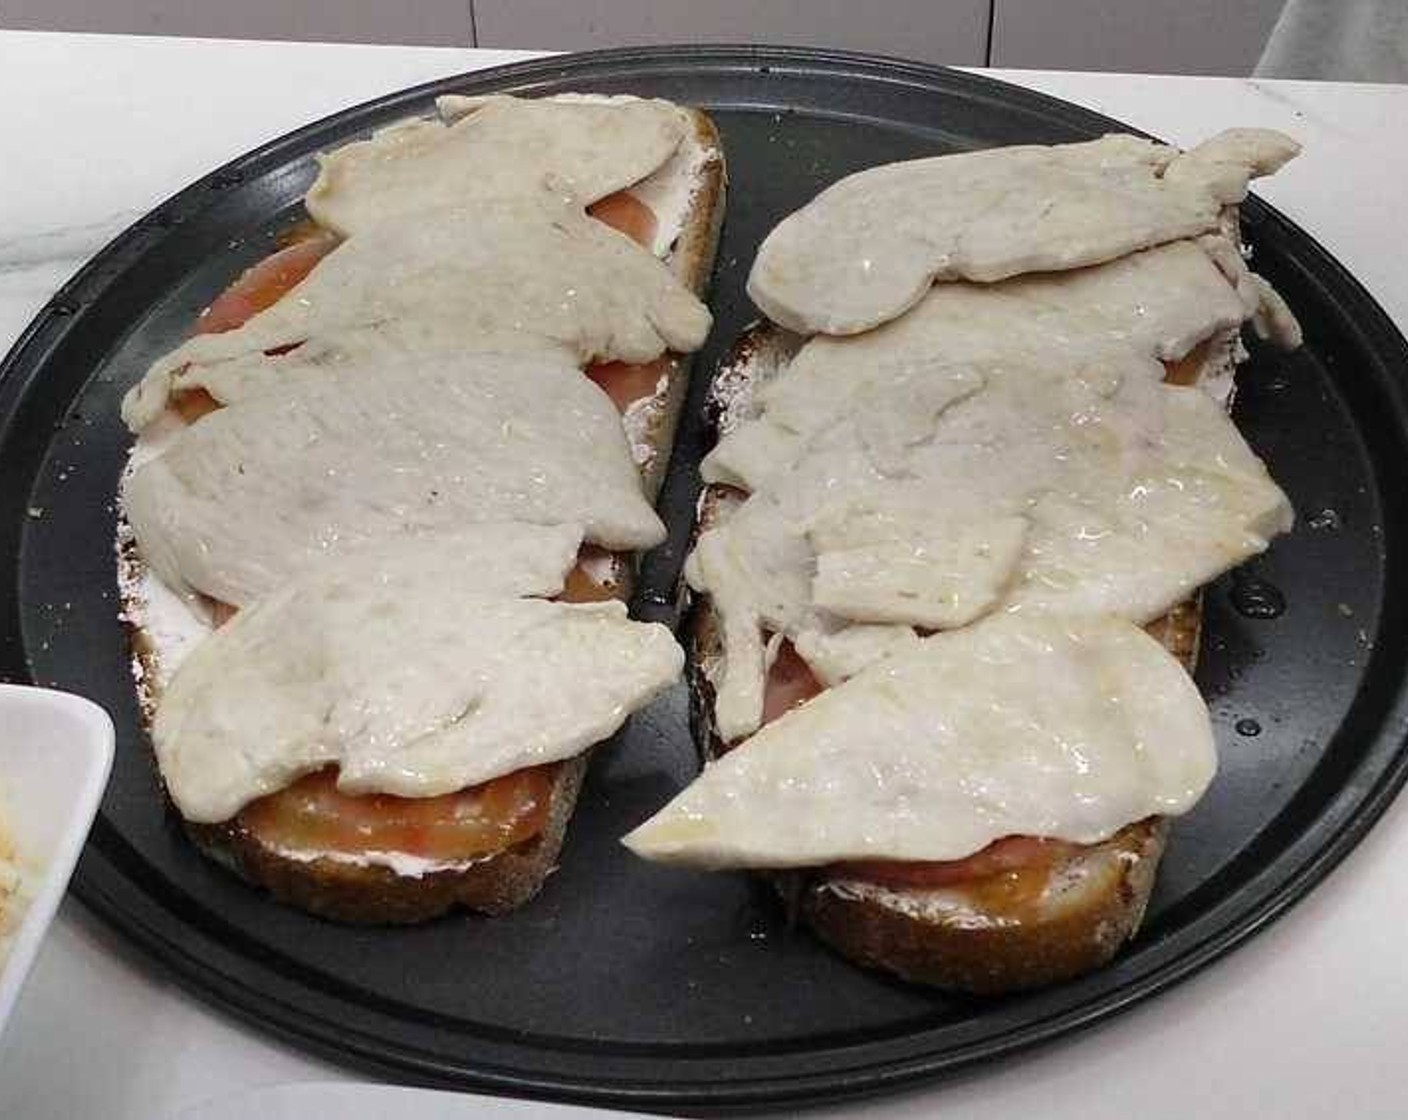 step 3 Spread Cream Cheese (to taste) on the Bread (to taste) slices. Add Tomatoes (2) and the chicken fillets to each sandwich.